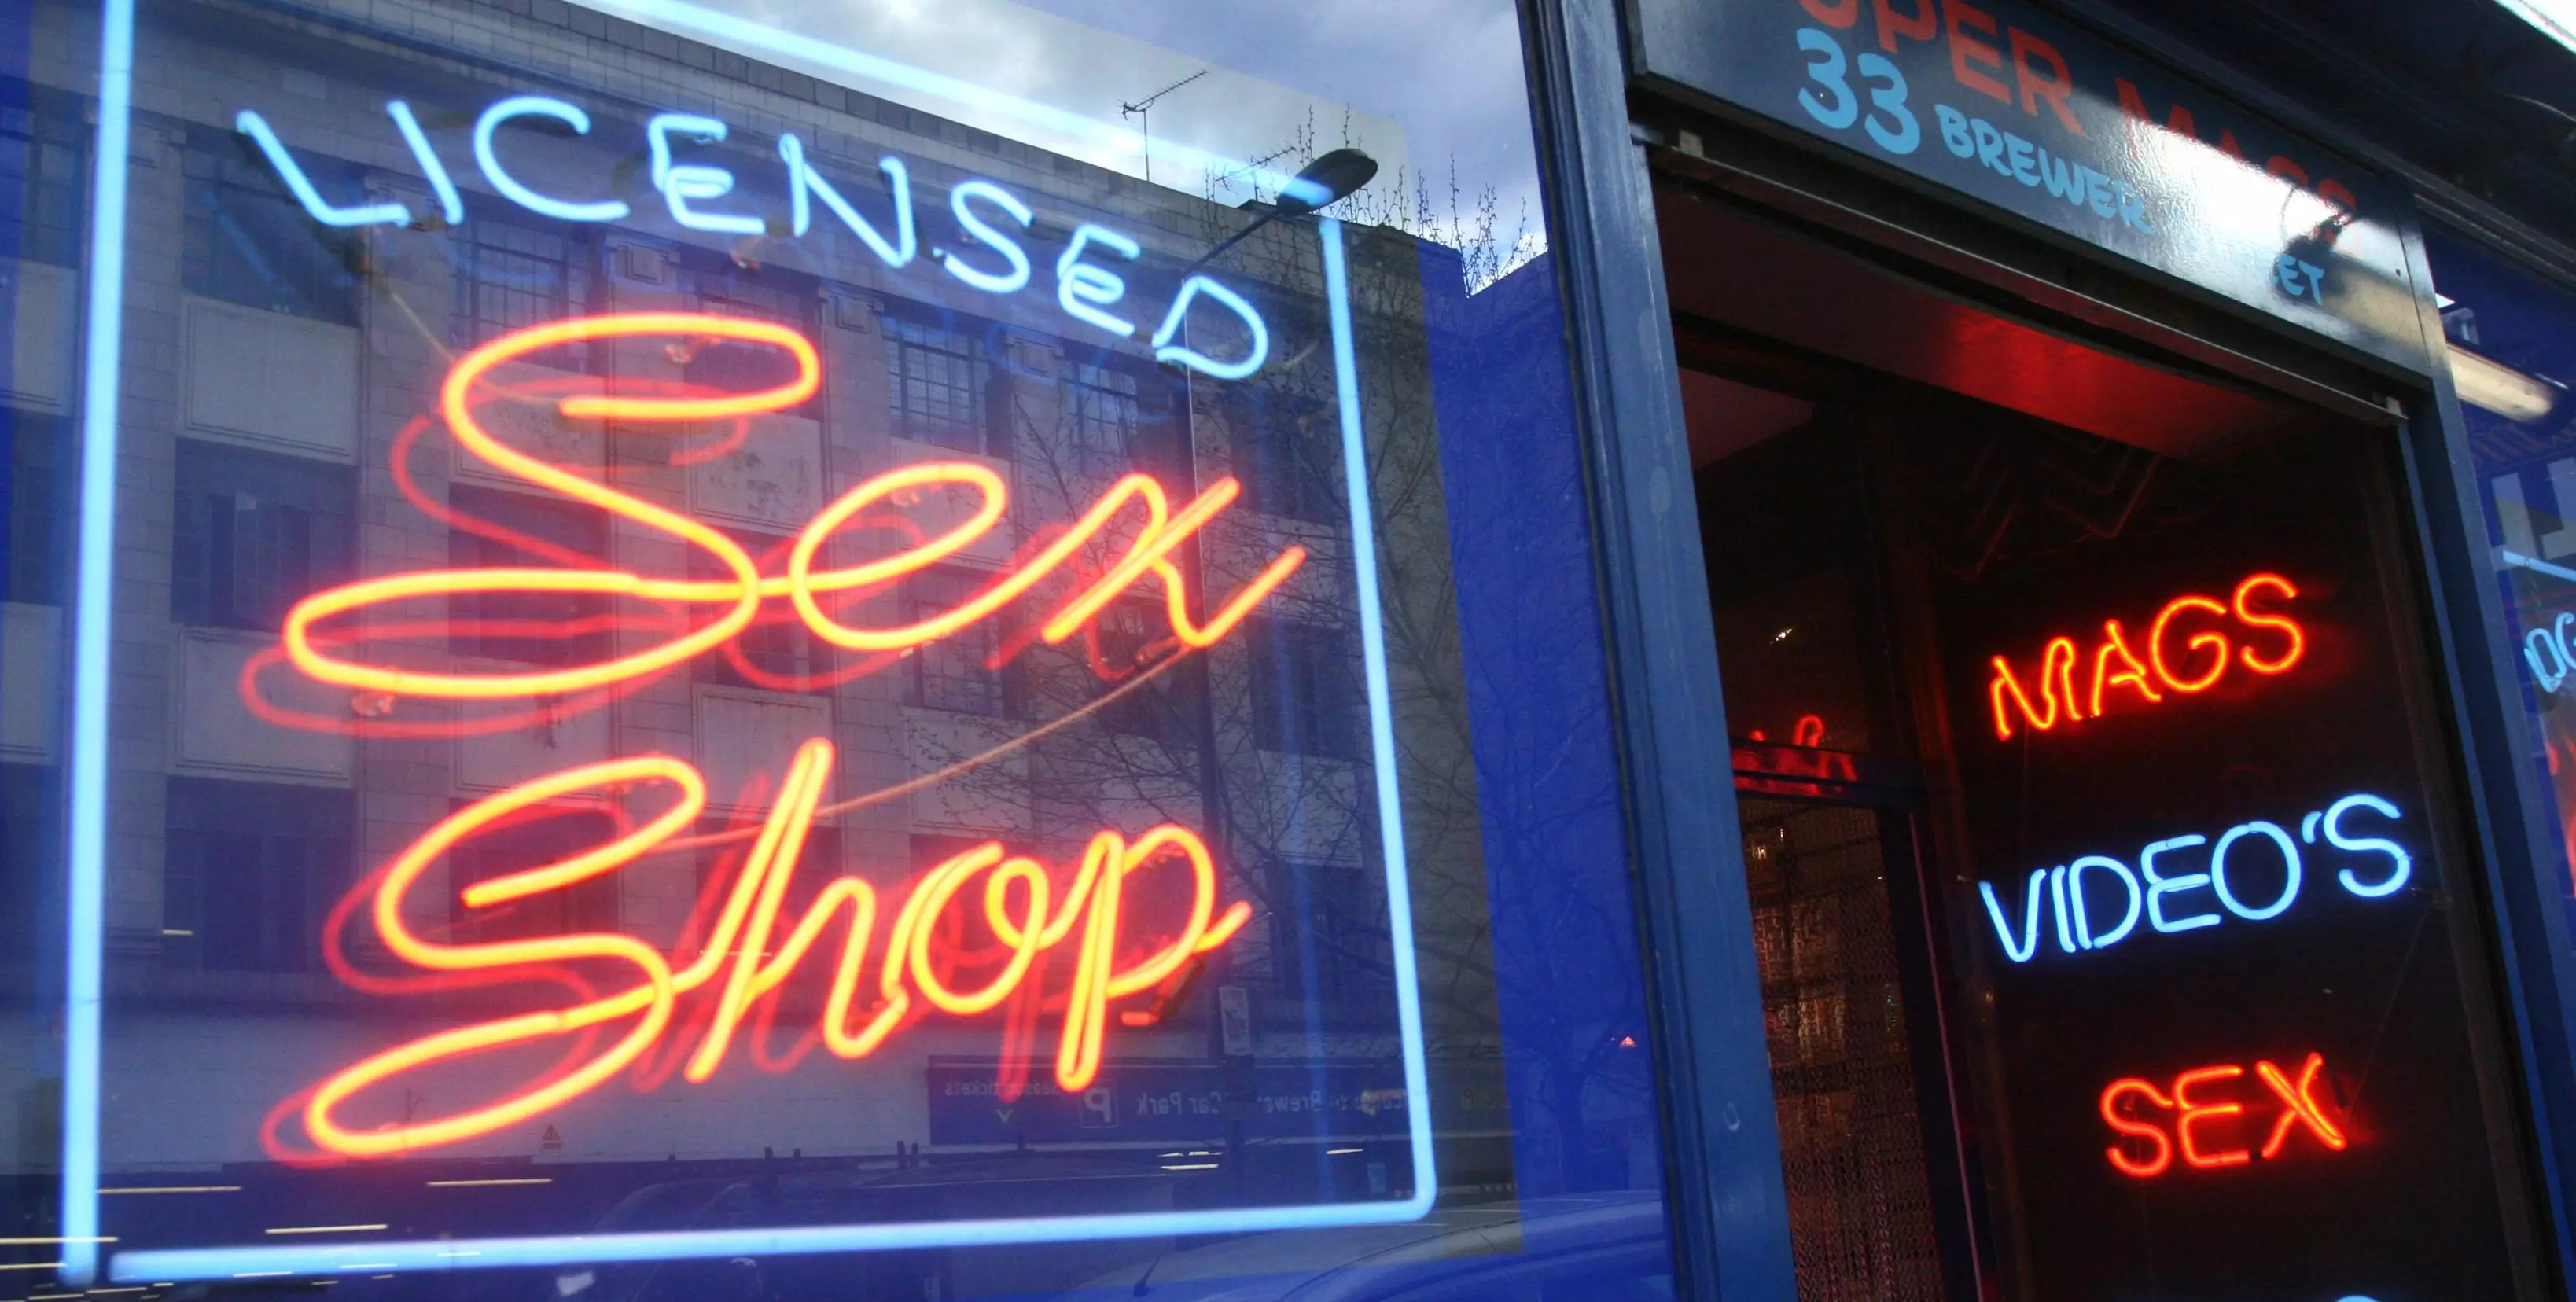 Sex Workers Open Up About The Difference Between Business And Pleasure